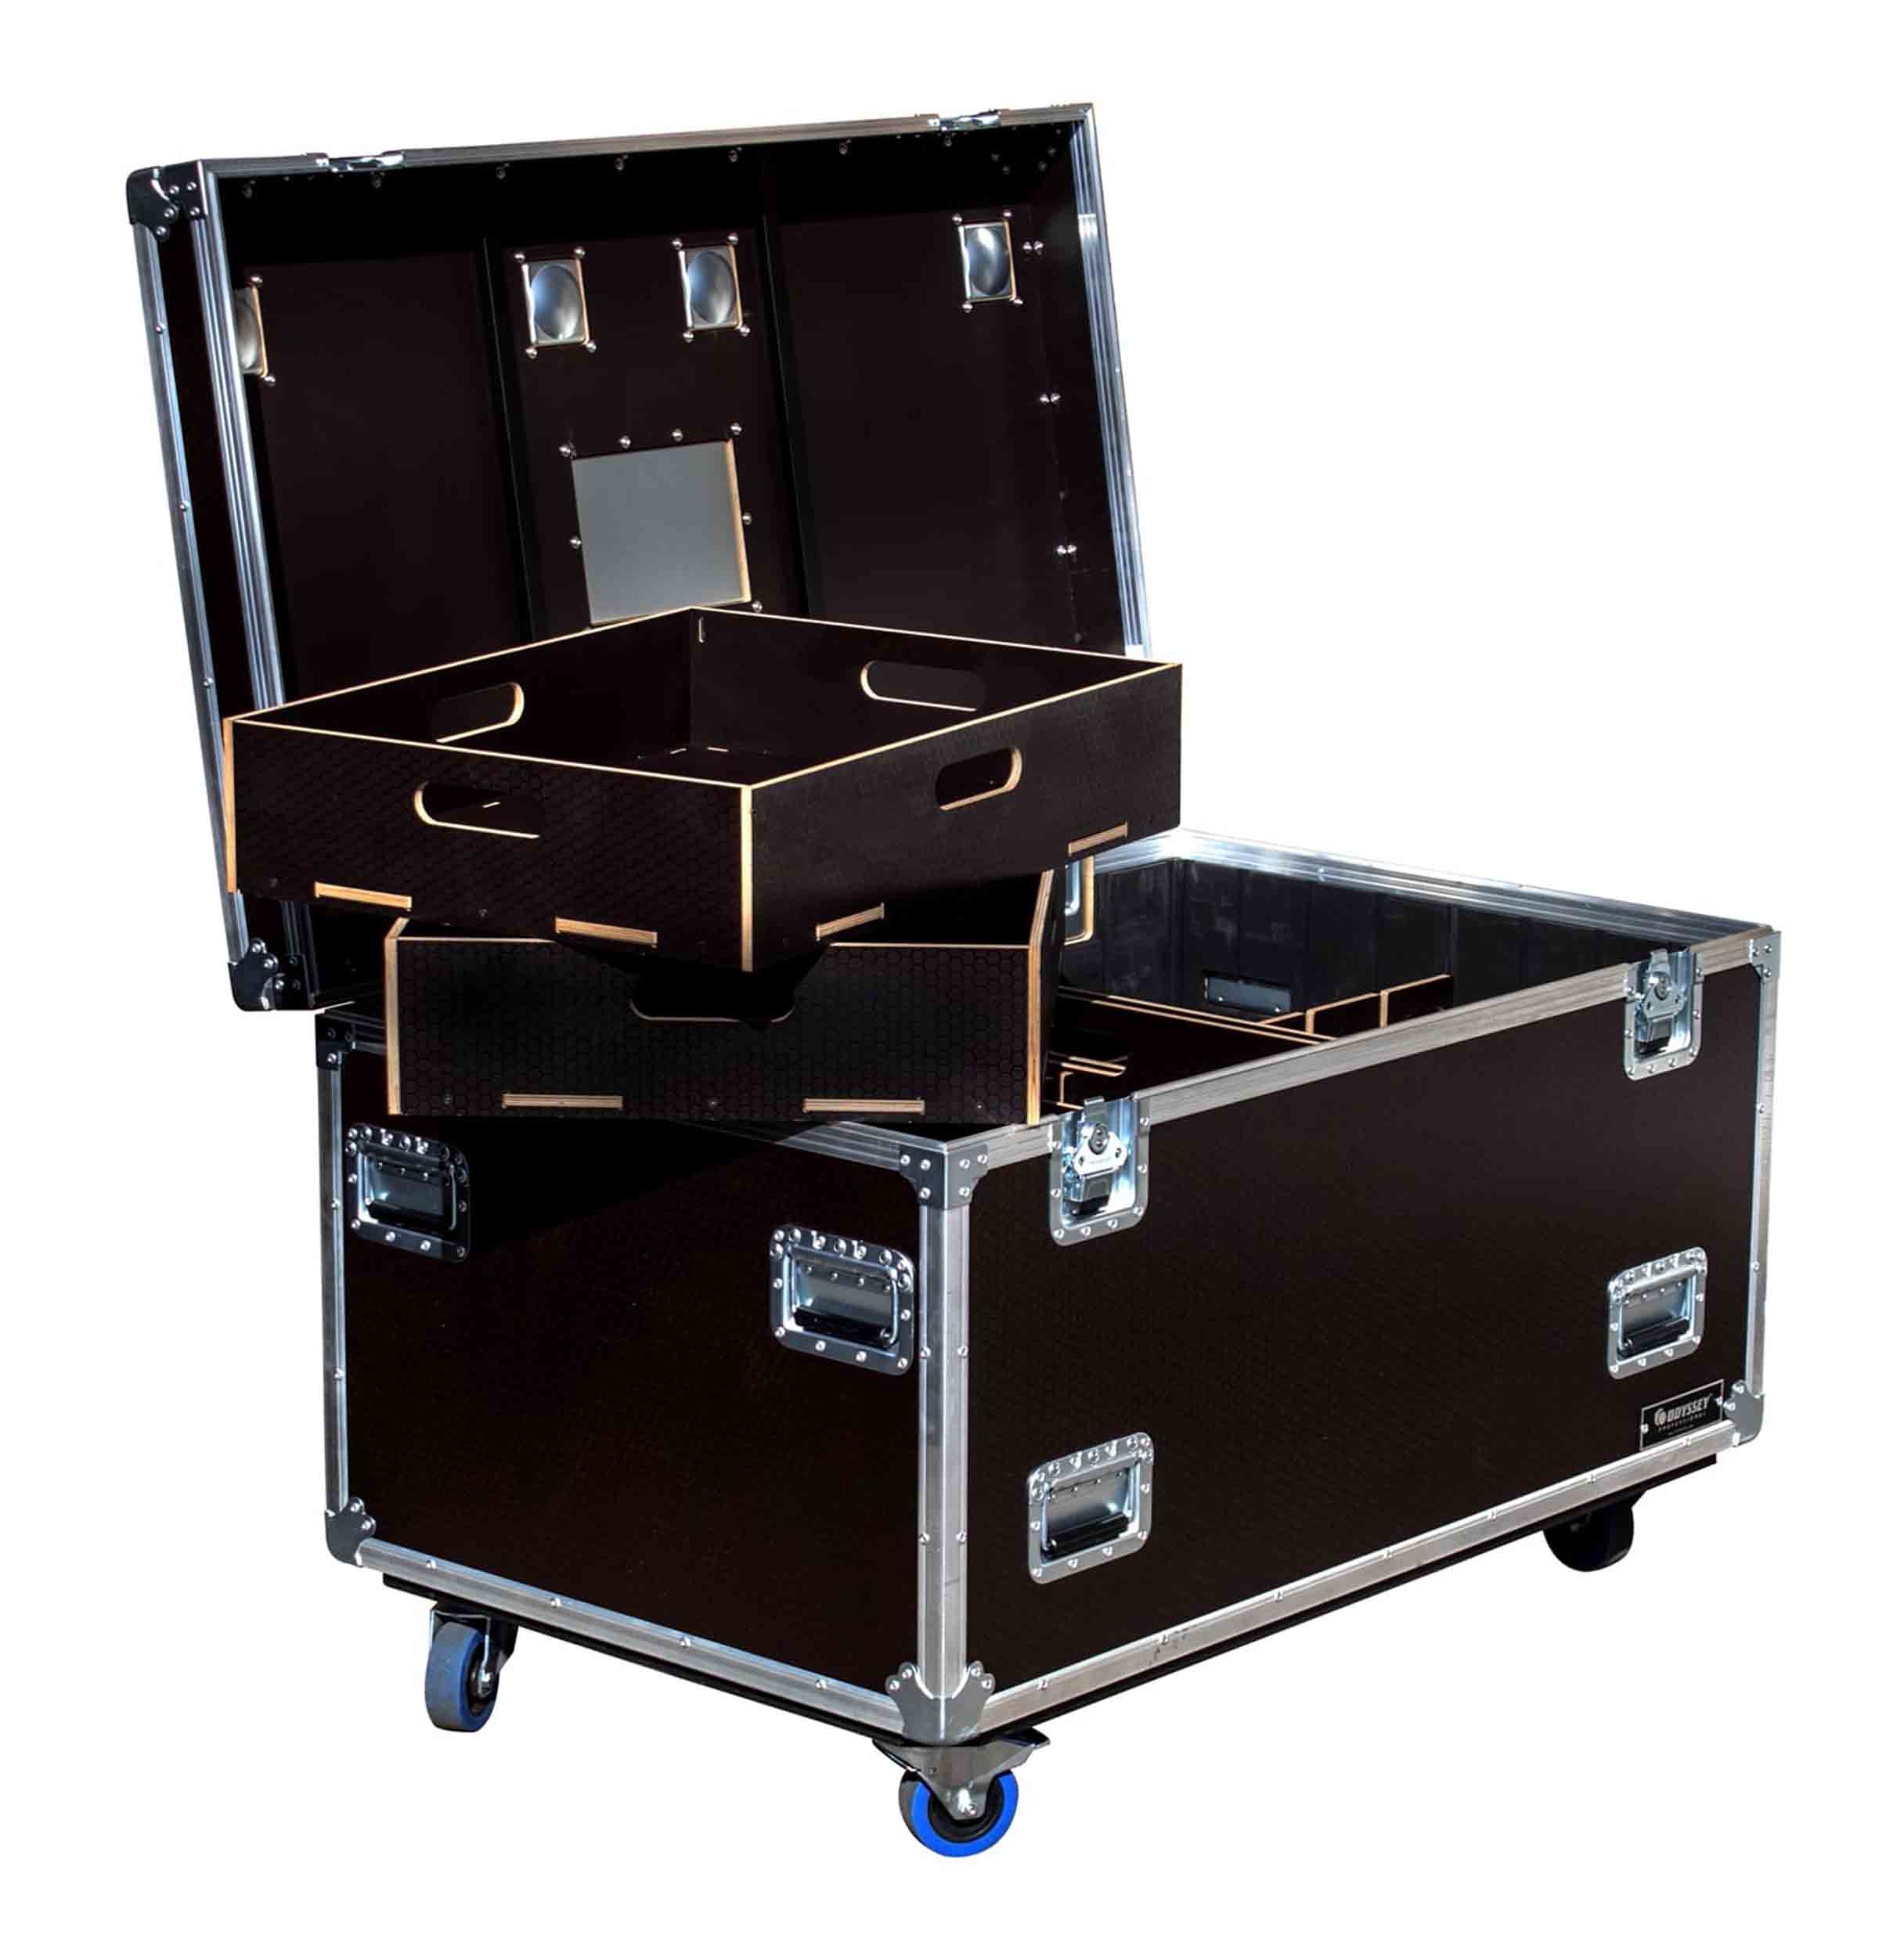 Odyssey OPT483030WBRN, Professional Brown Hex Board Utility Tour Trunk Case with Caster Wheels by Odyssey